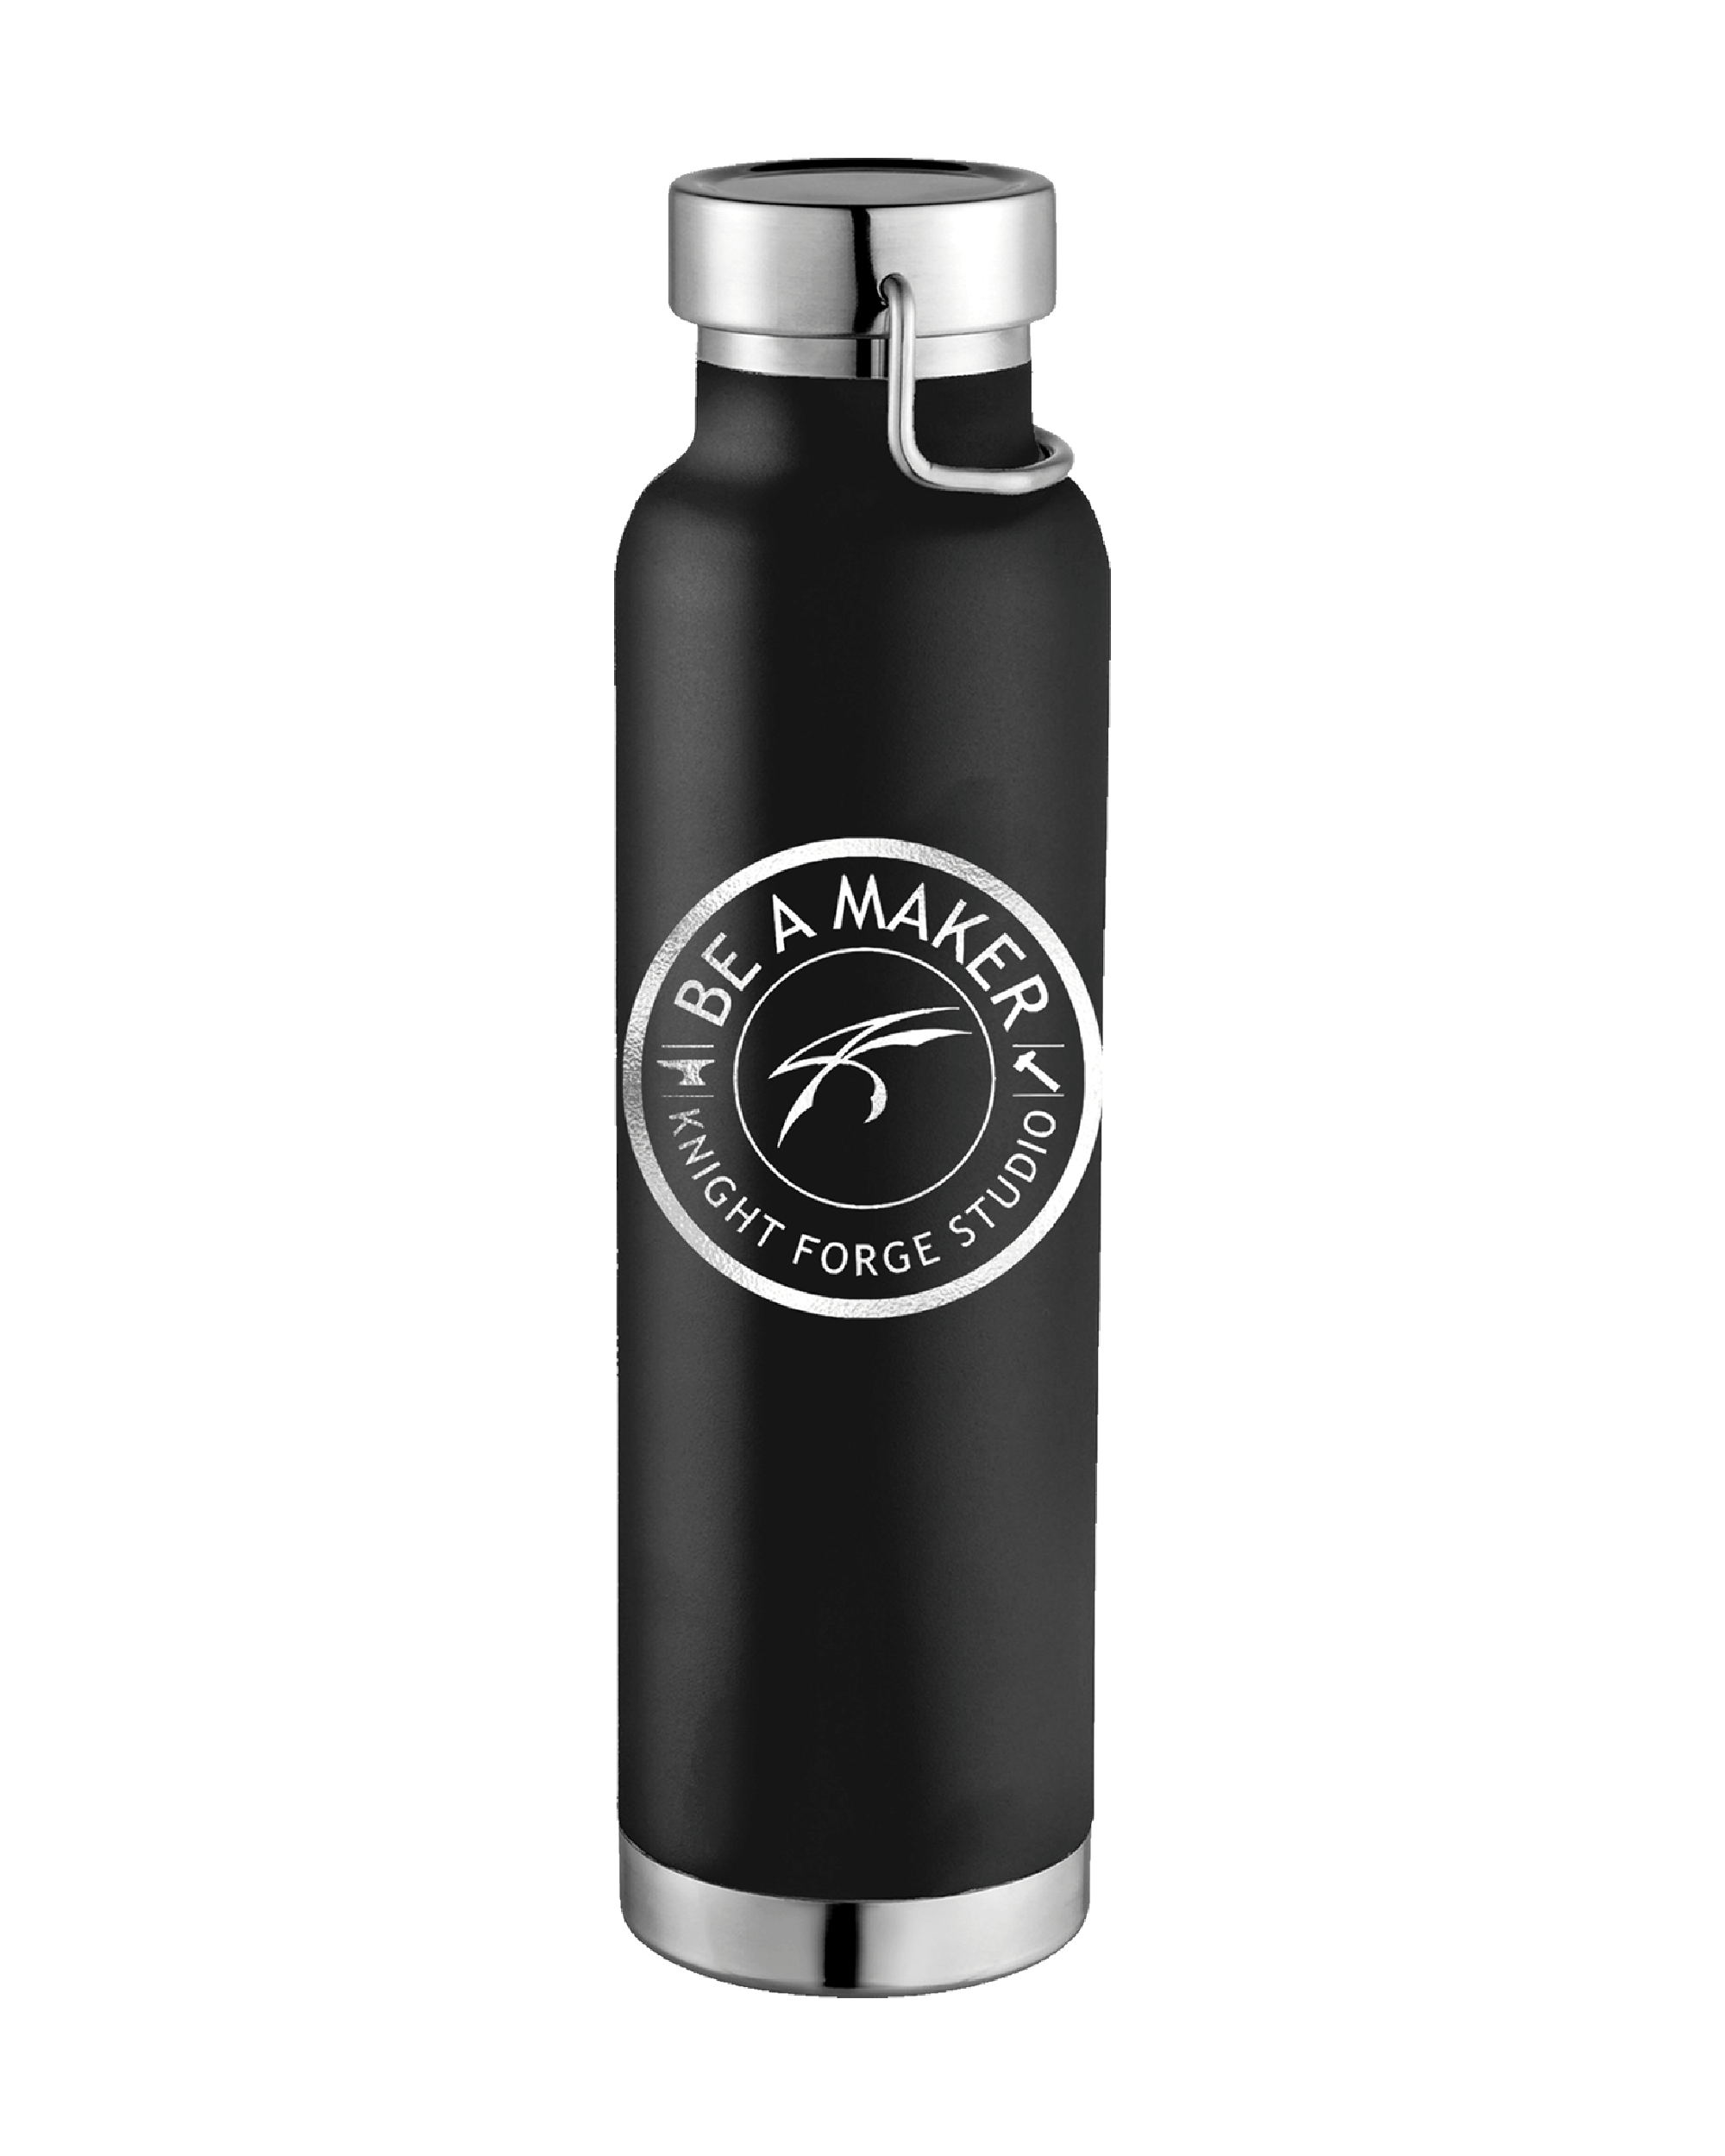 Be A Maker Insulated Bottle - Limited Edition